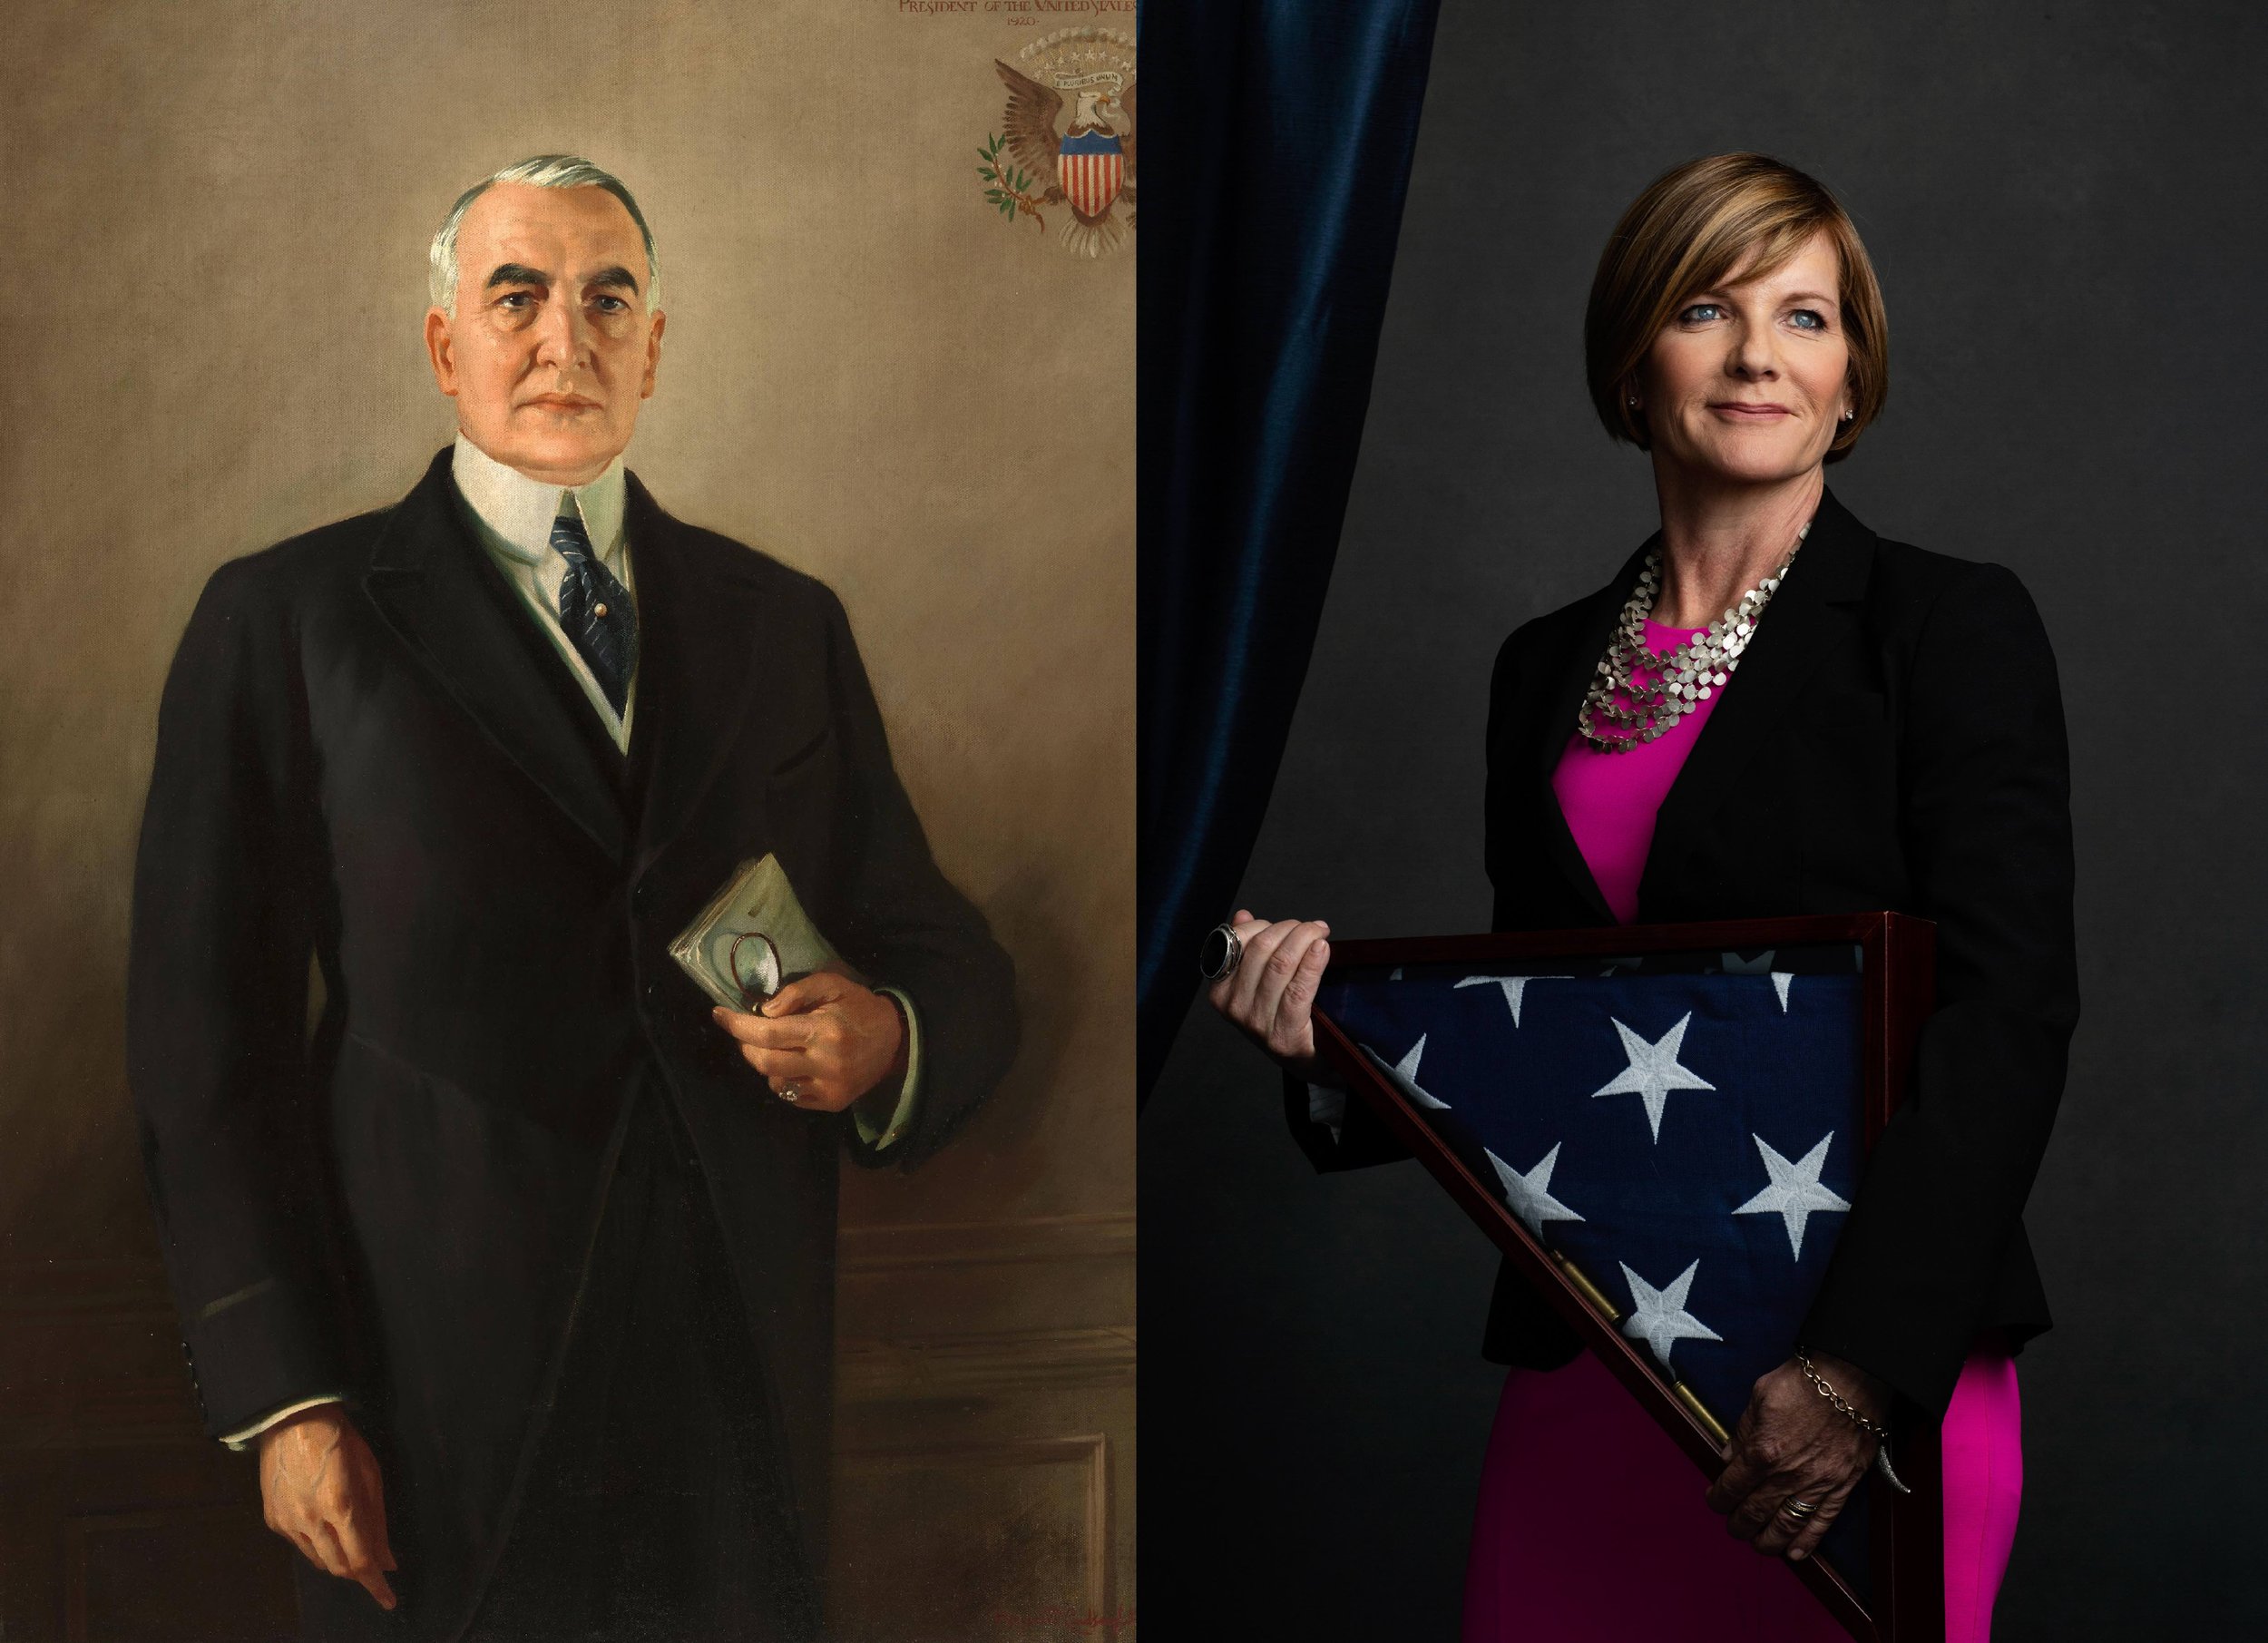  Warren Harding, the 29th president of the United States, painted by Margaret Lindsay Williams; Susie Lee (D-NV), representing Nevada’s 3rd district, elected in 2018. 